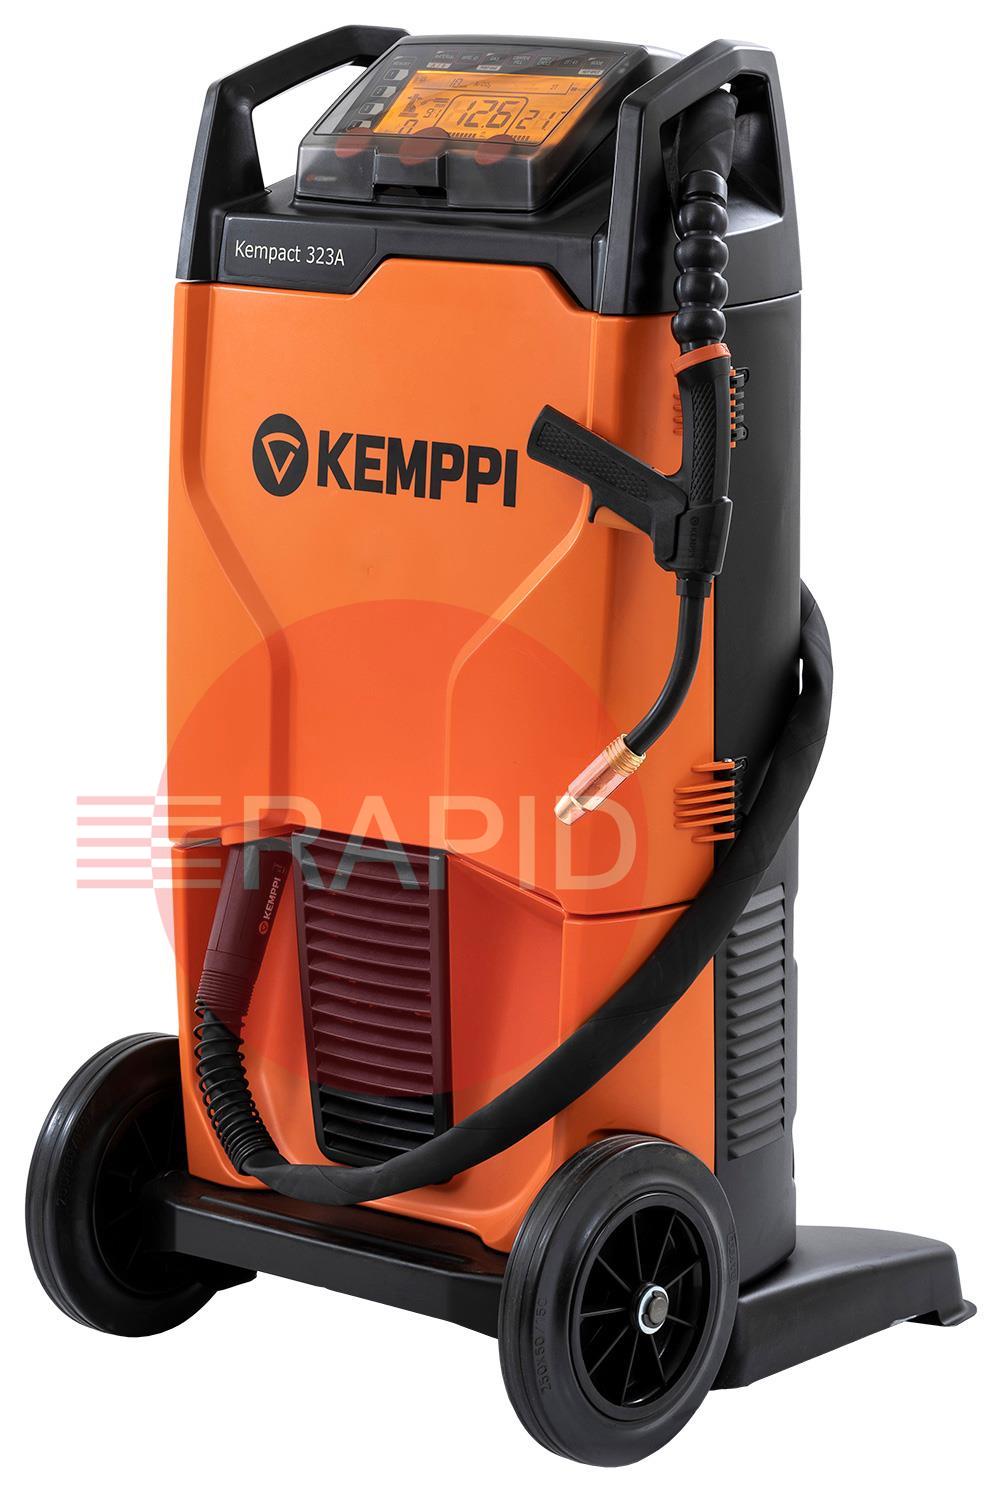 P2276GXE  Kemppi Kempact RA 323A, 320A 3 Phase 400V MIG Welder, with Flexlite GXe 205G 5.0m Torch